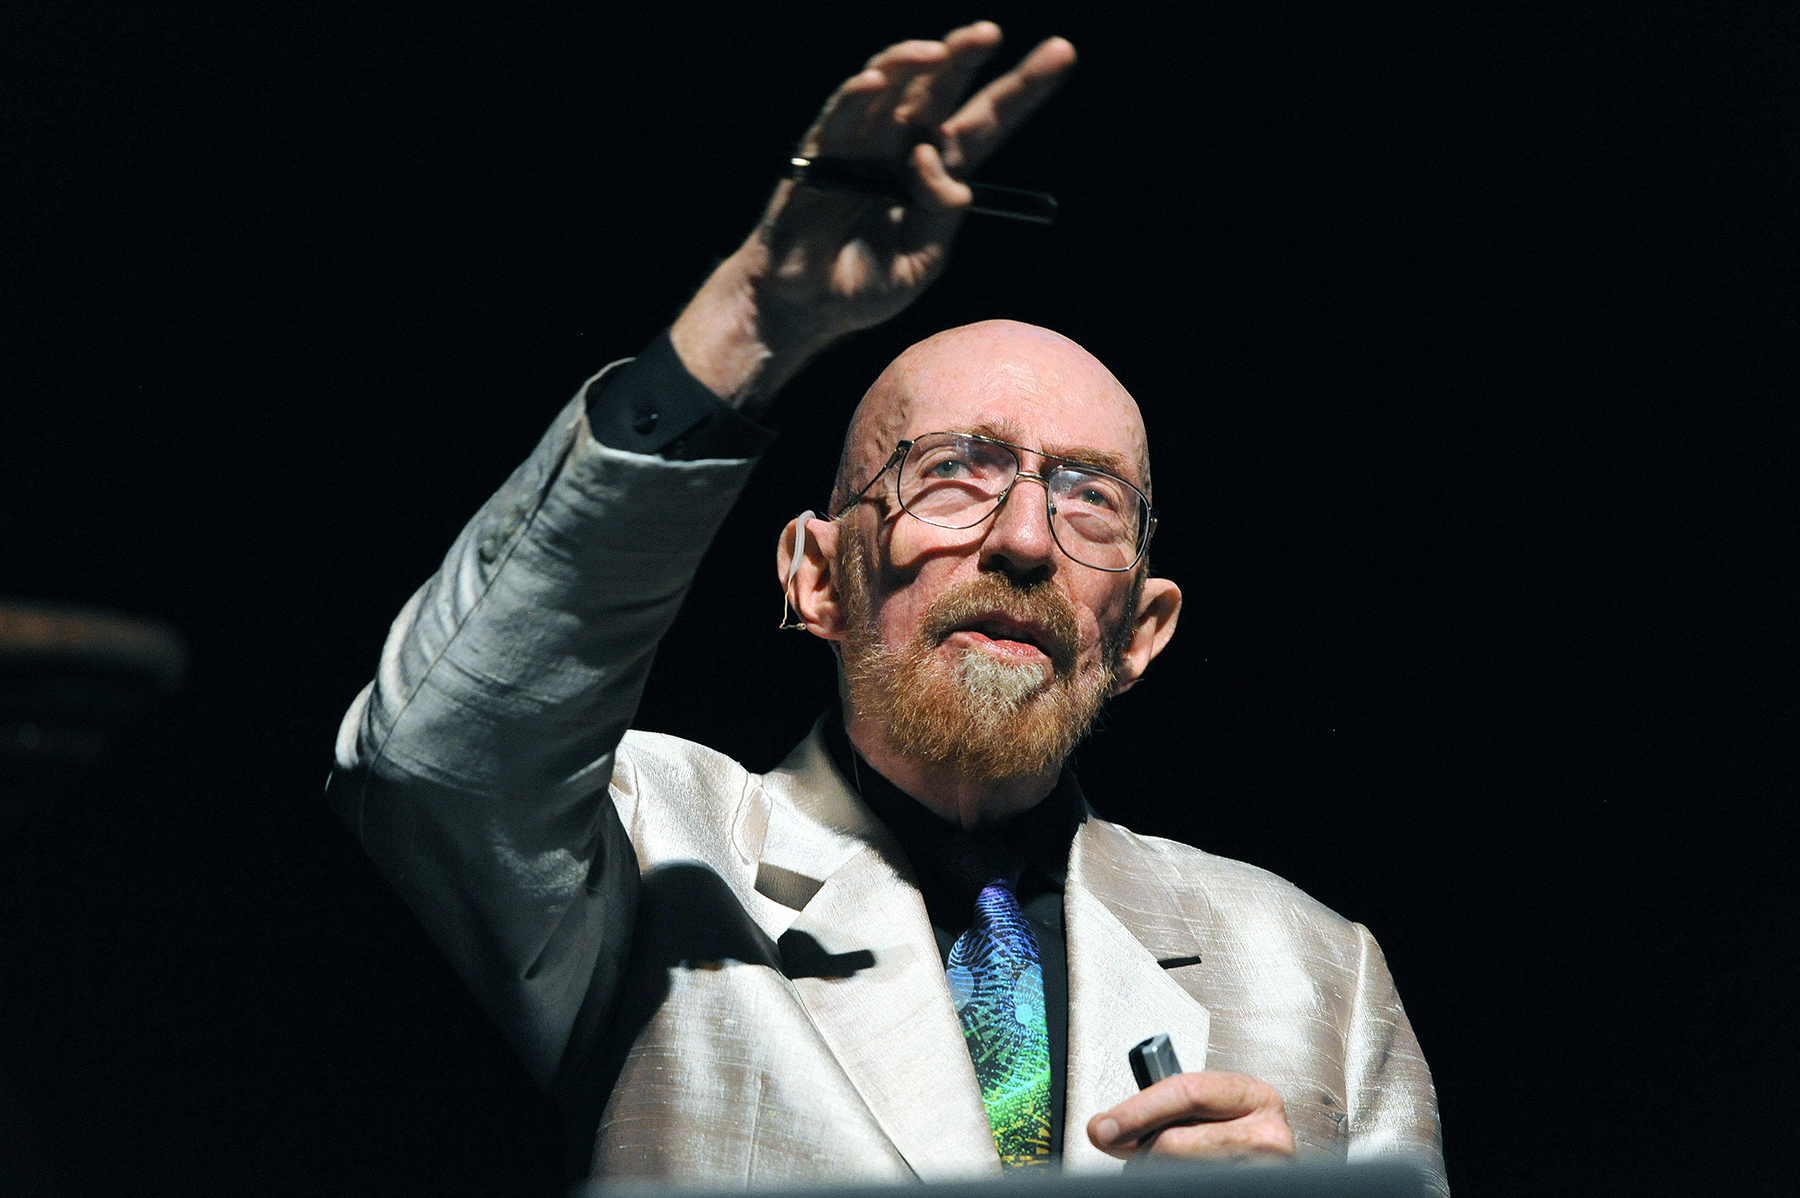 Thorne and his collaborators won the Nobel Prize in Physics in 2017. (photo by Donn Young) this photo shows a closeup of Thorne gesturing 